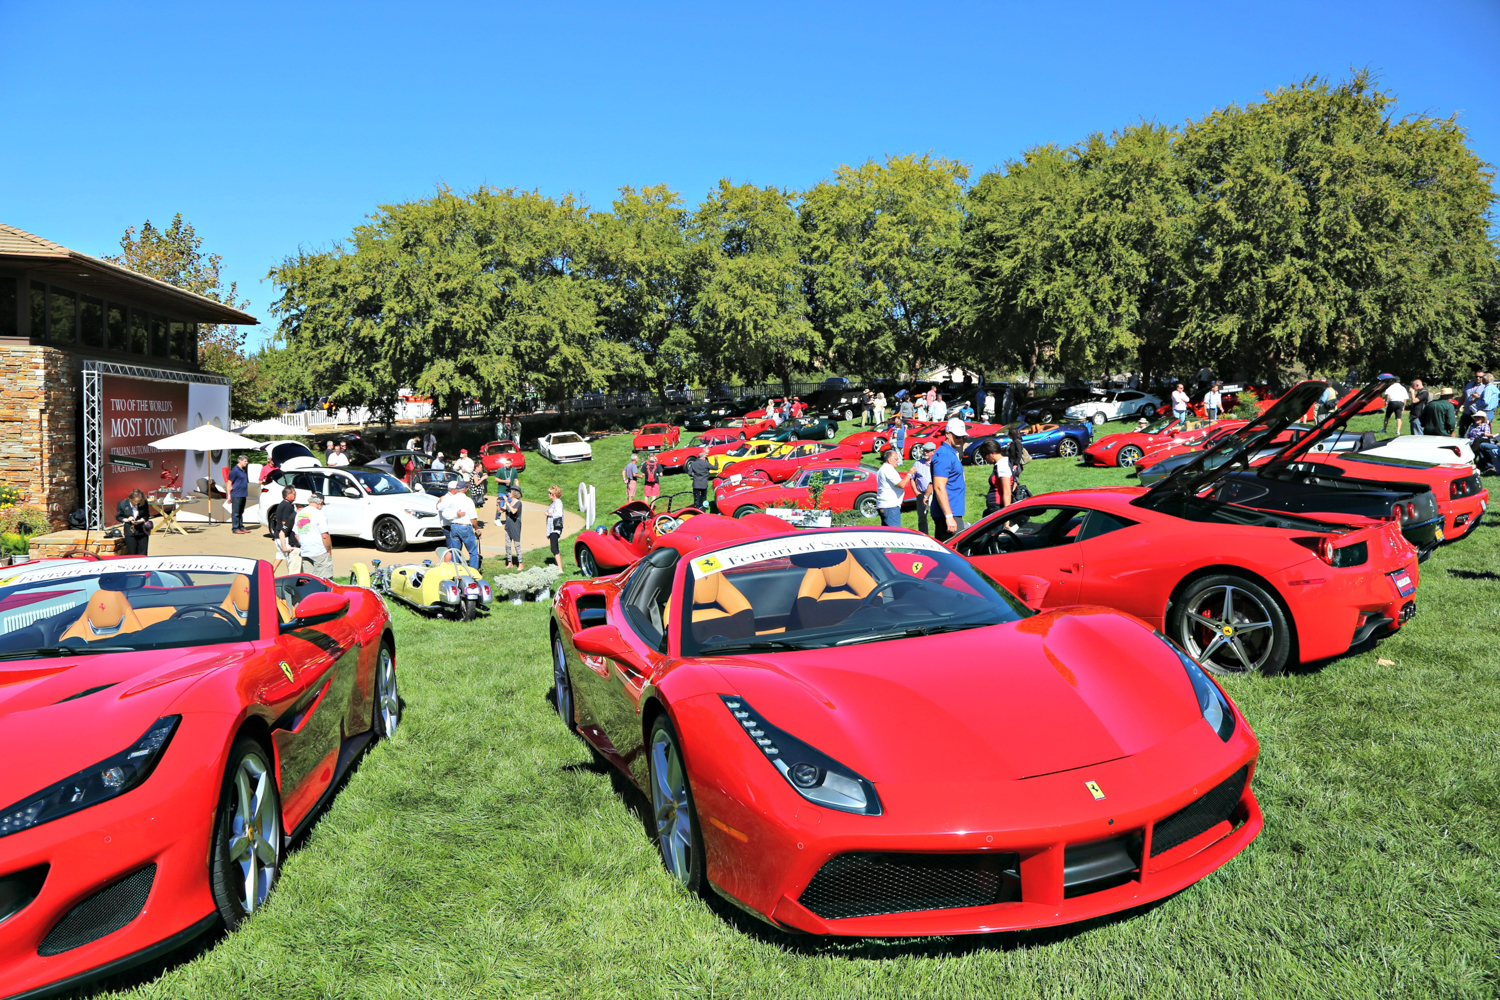 Italian cars were featured at the 2018 Niello Concours this year